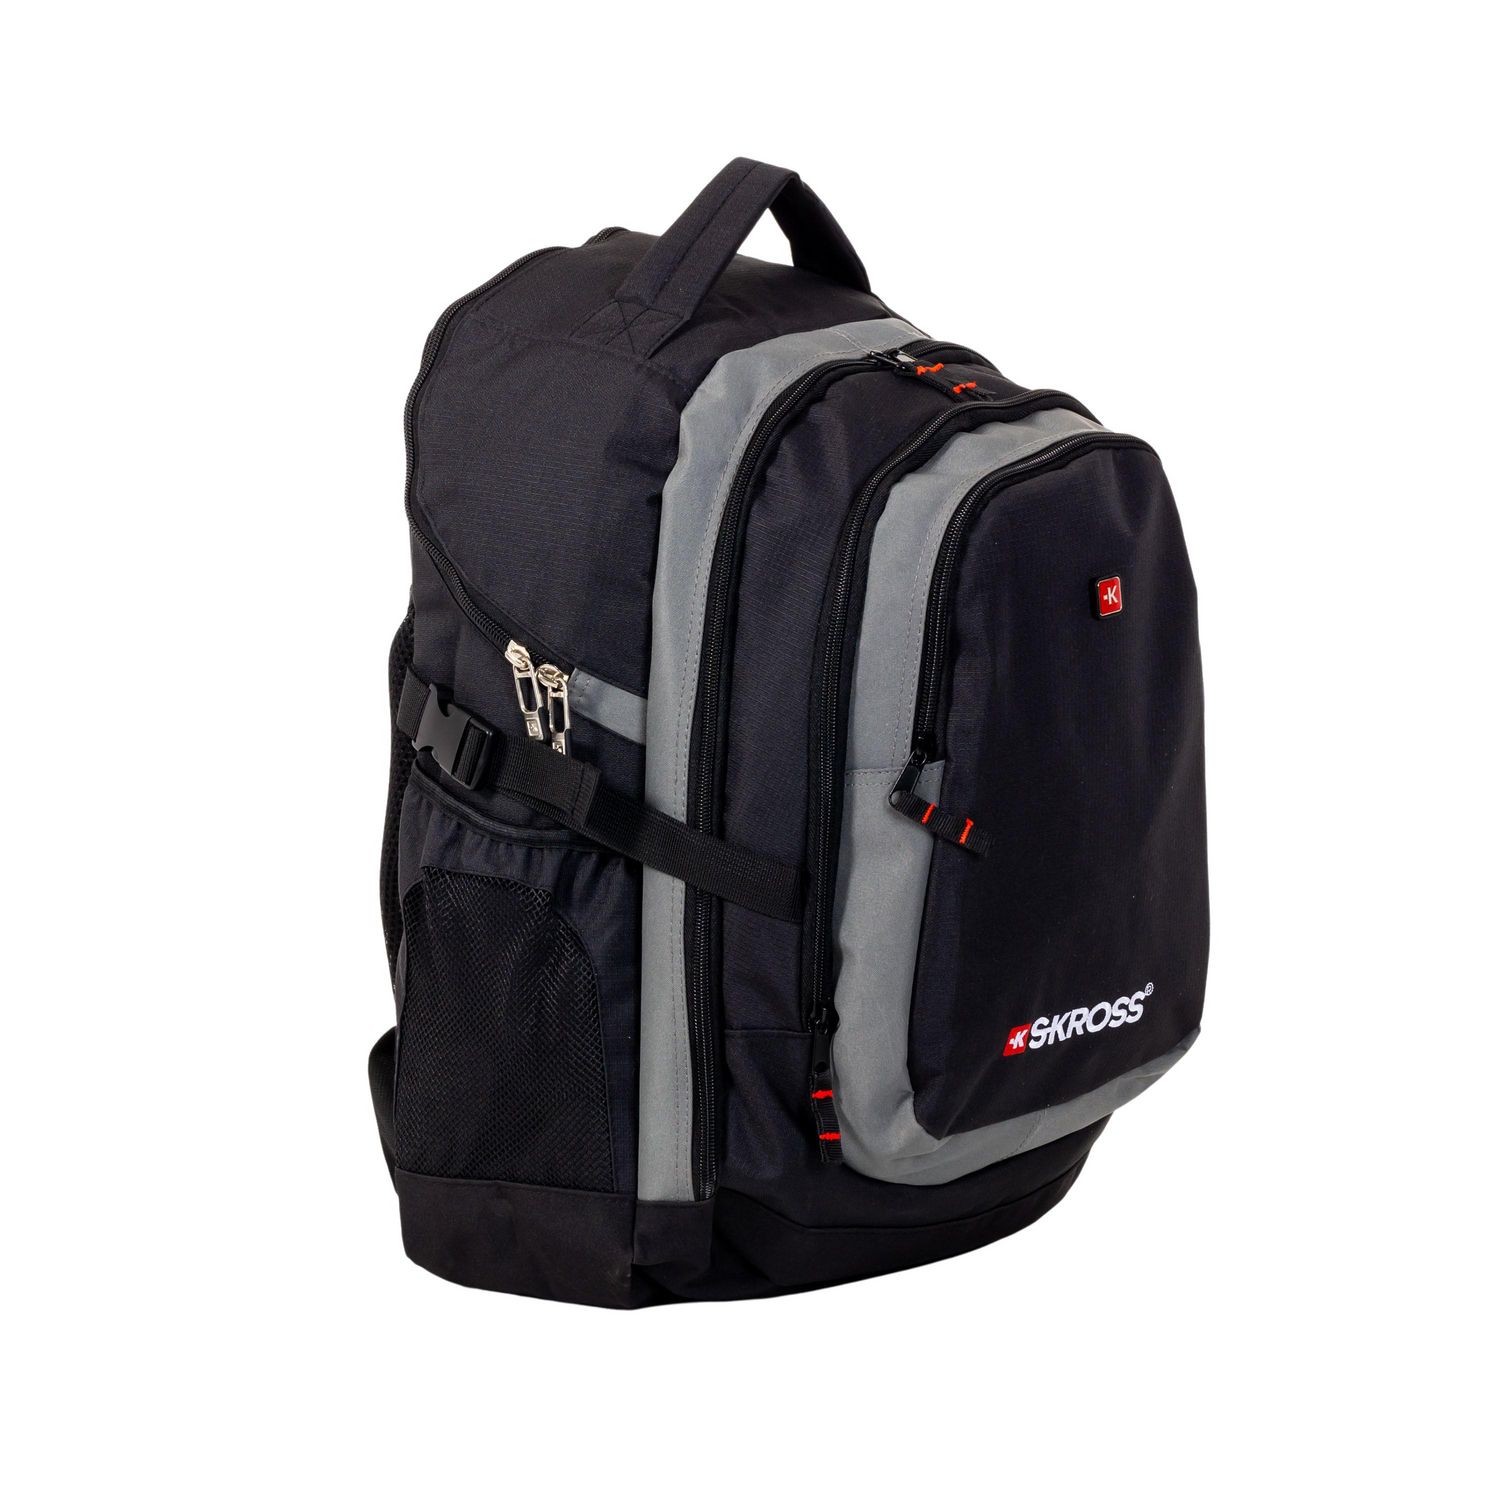 SKROSS Deluxe Travel Backpack with Laptop Sleeve, Assembled